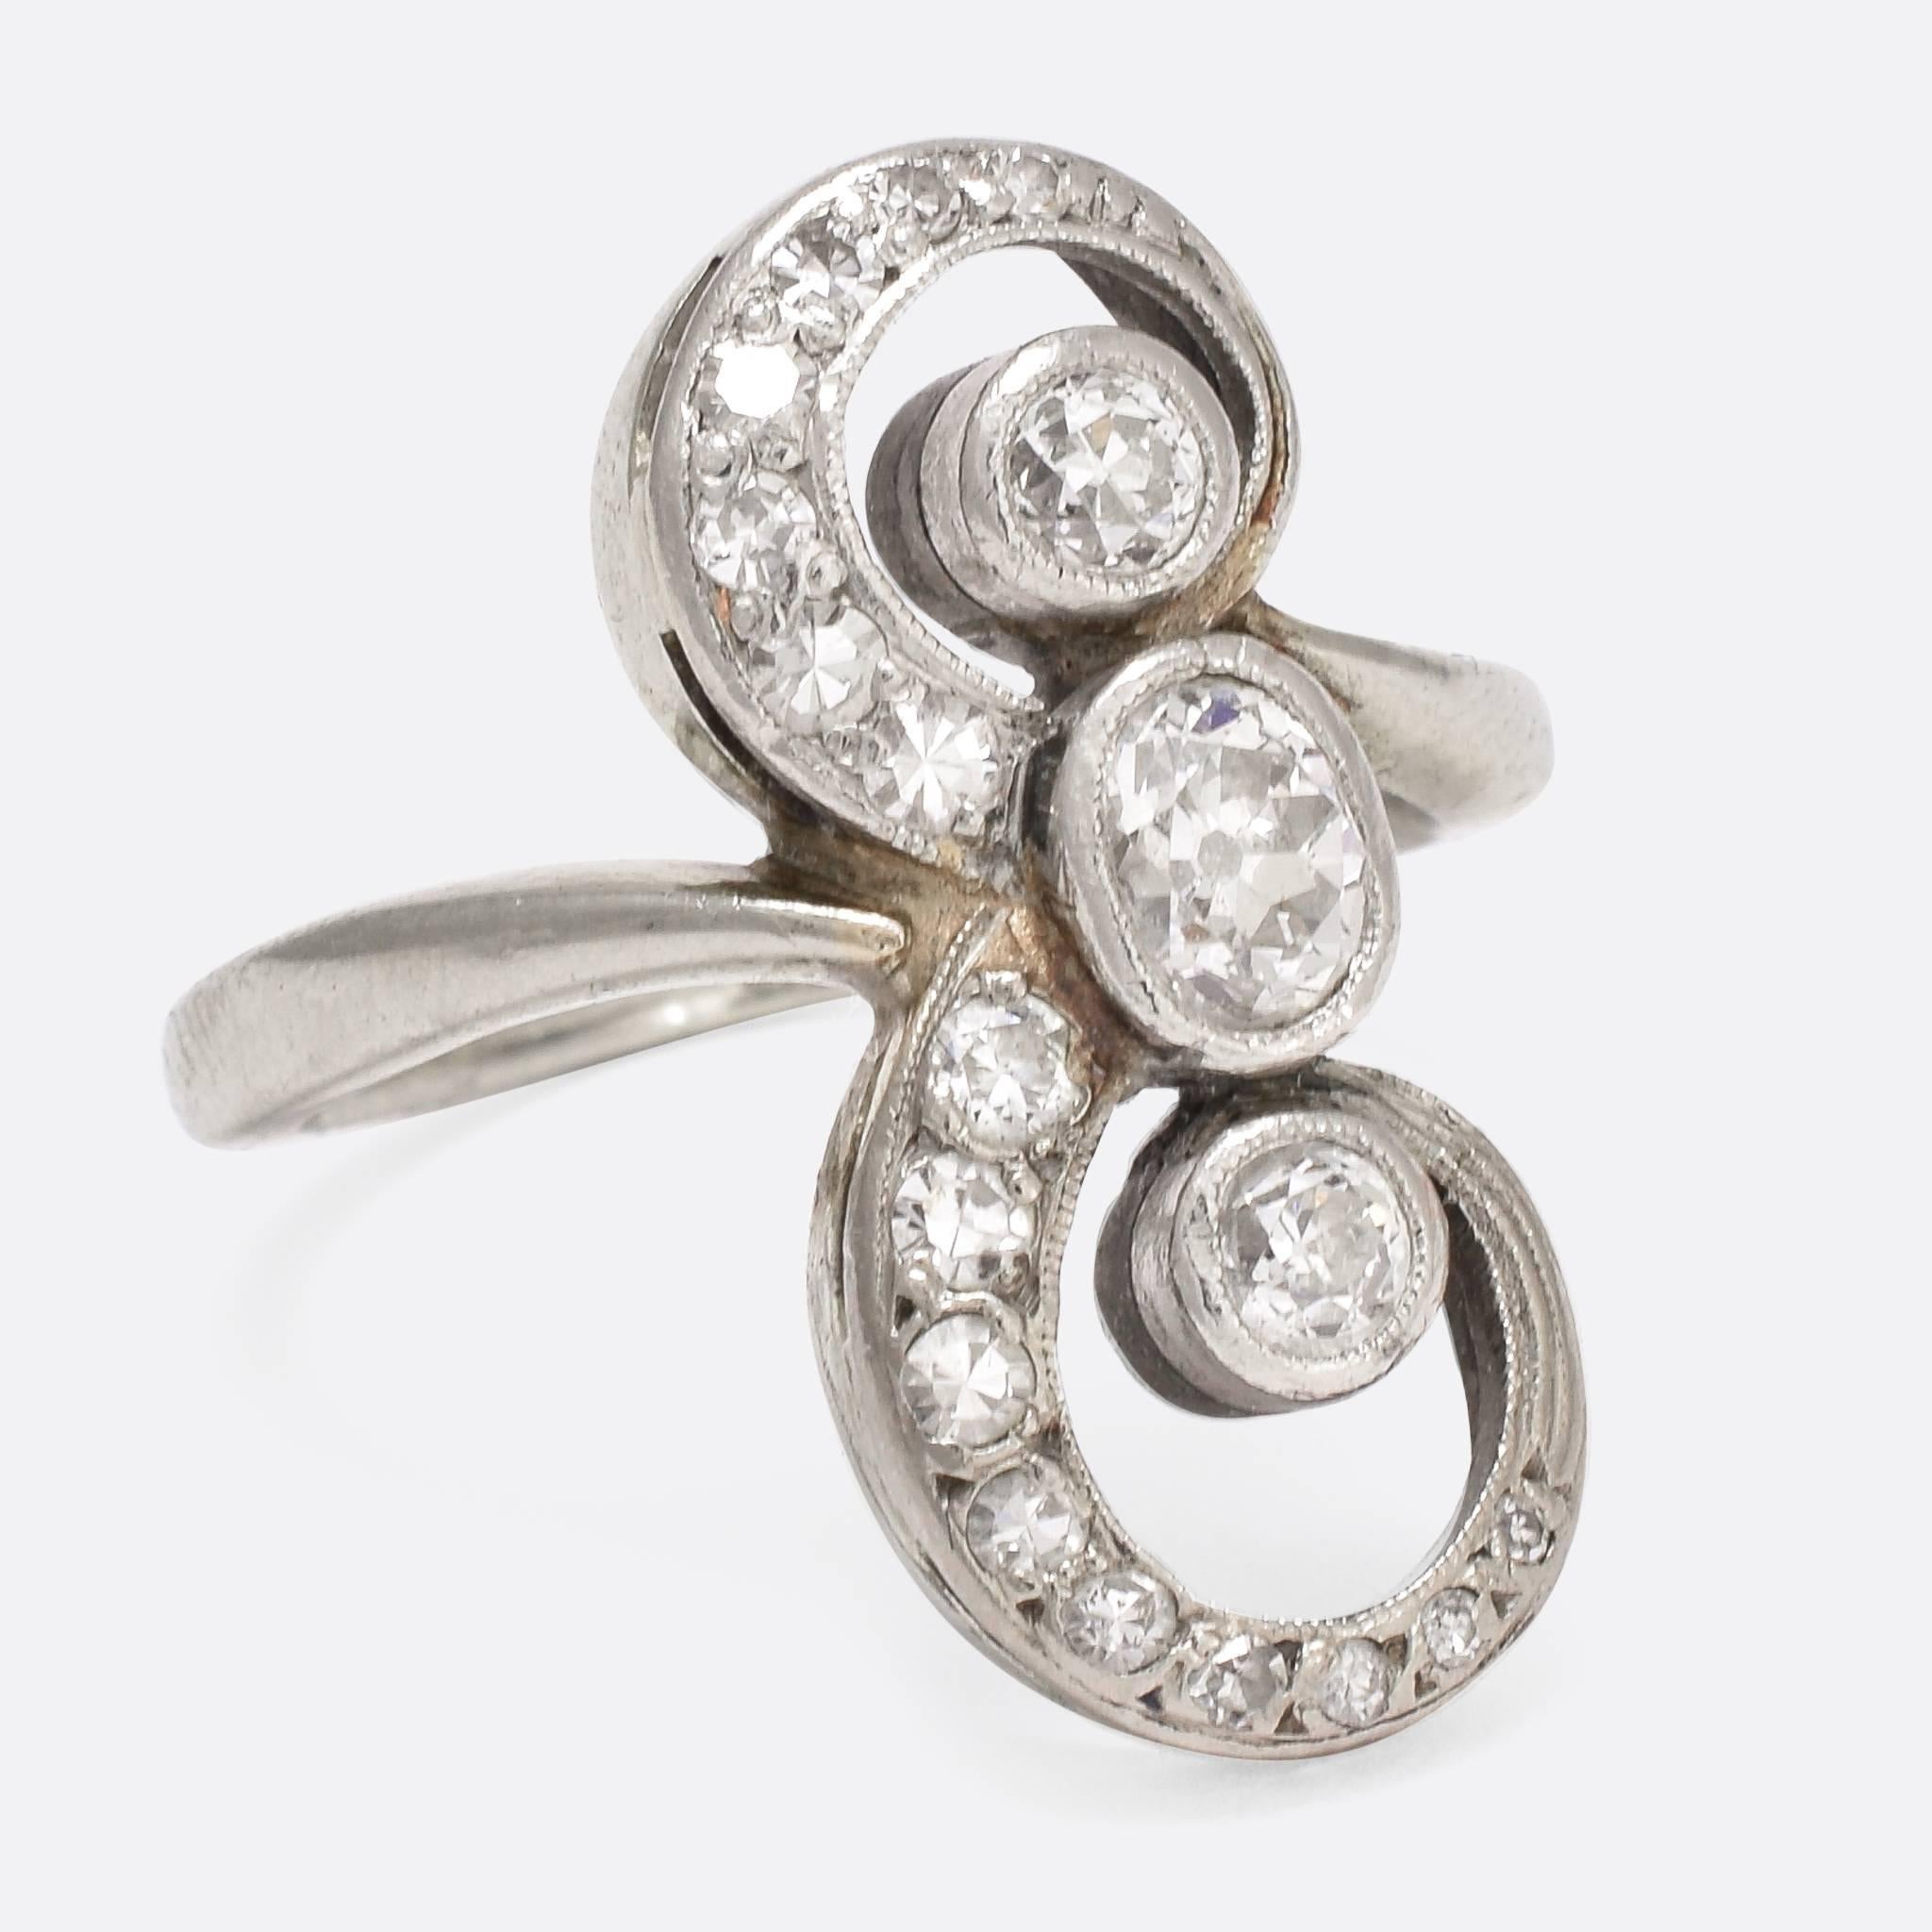 This beautiful antique ring features a cool 